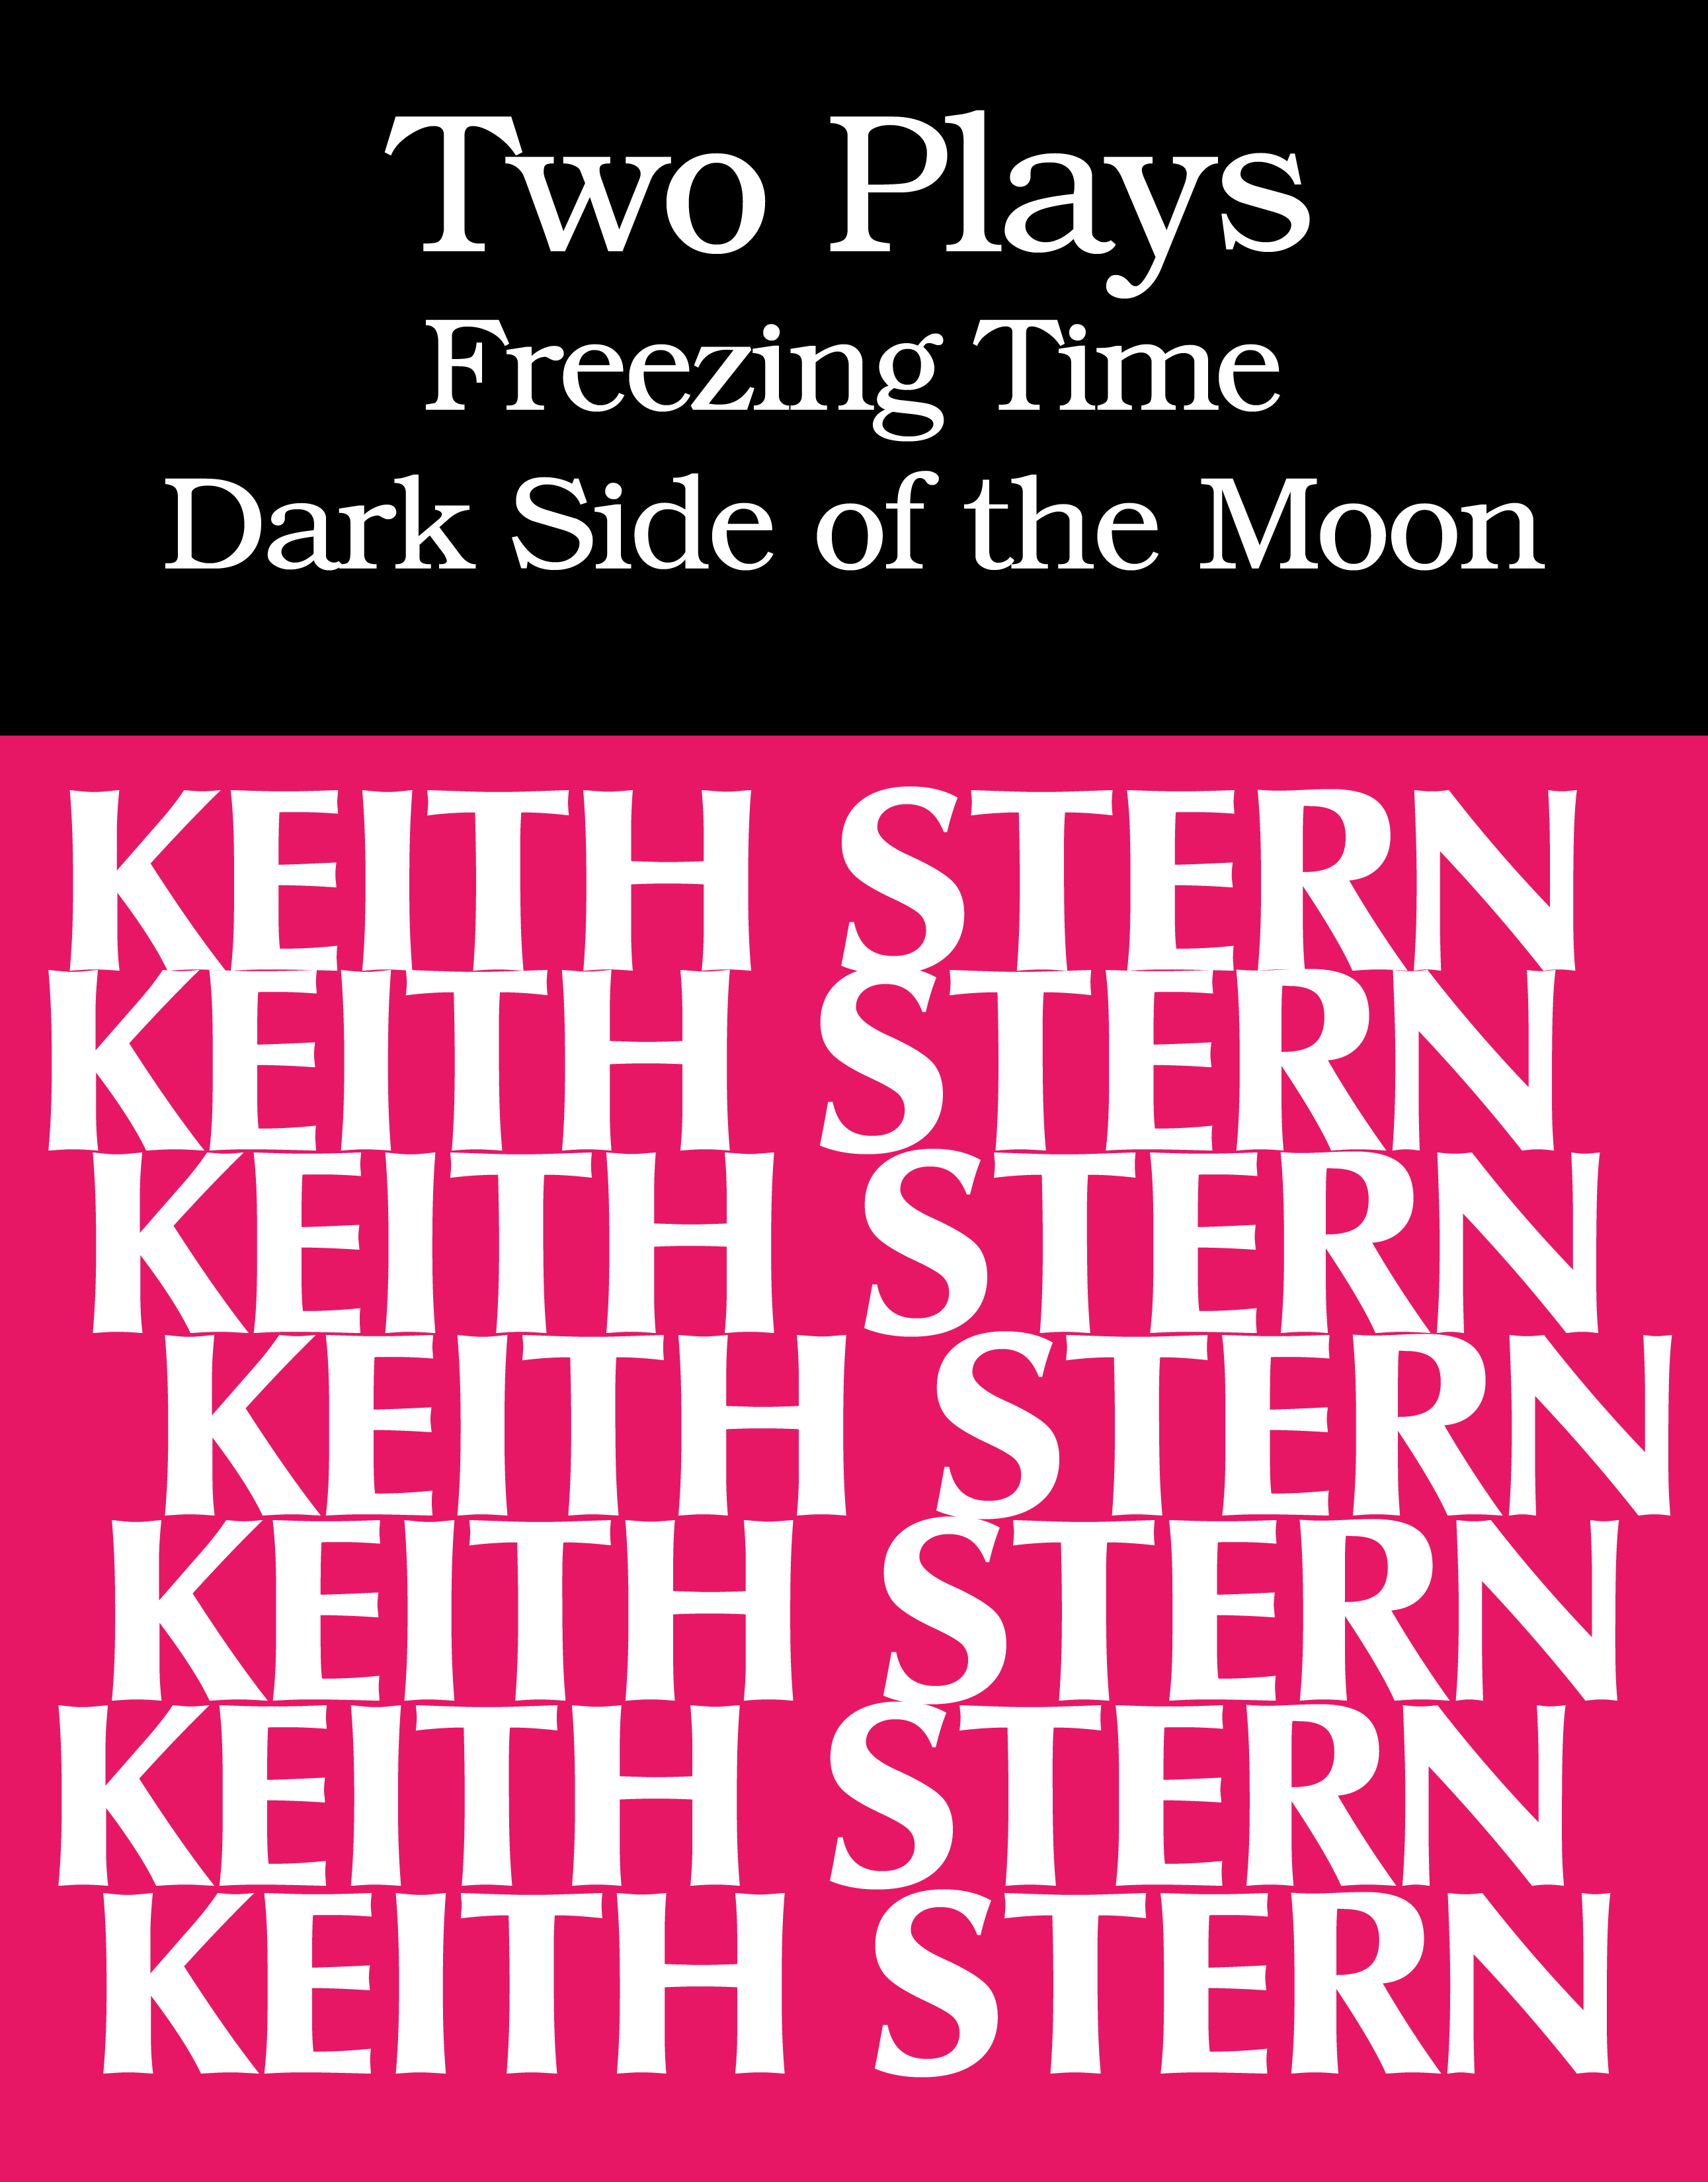 Two Plays by Keith Stern